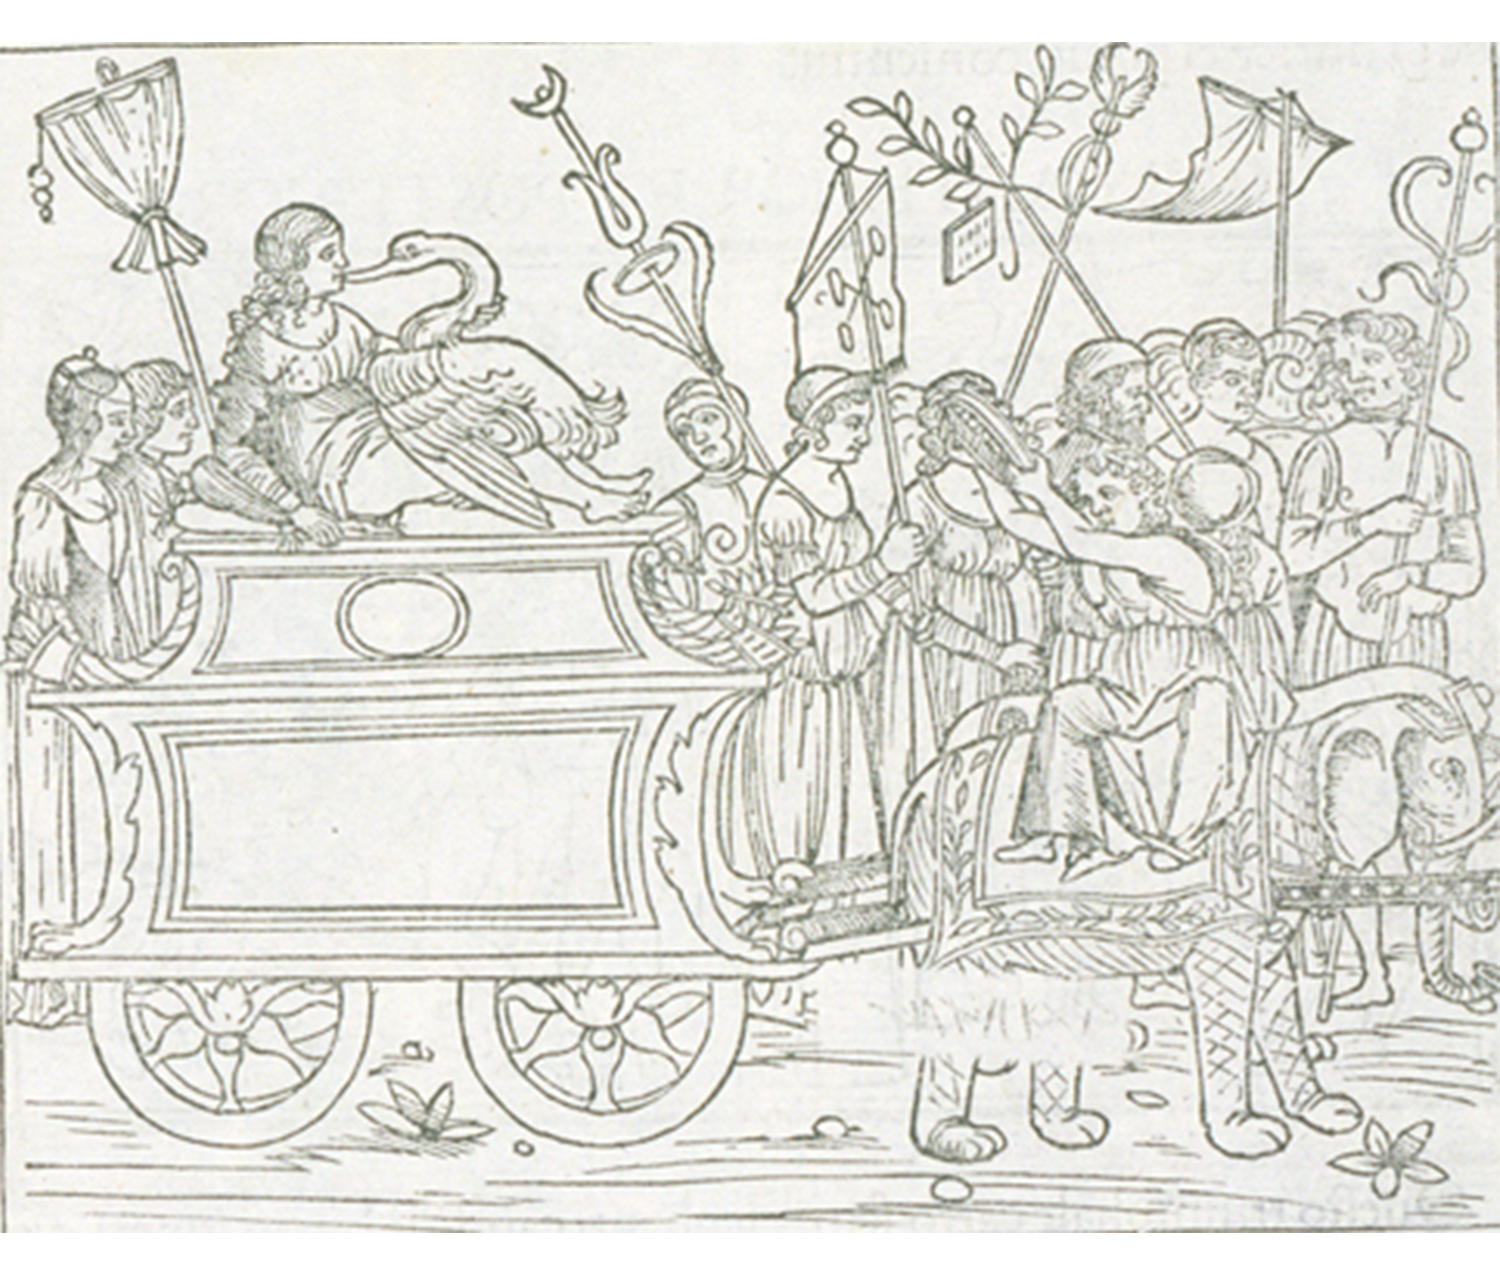 procession with woman on carriage kissing a swan